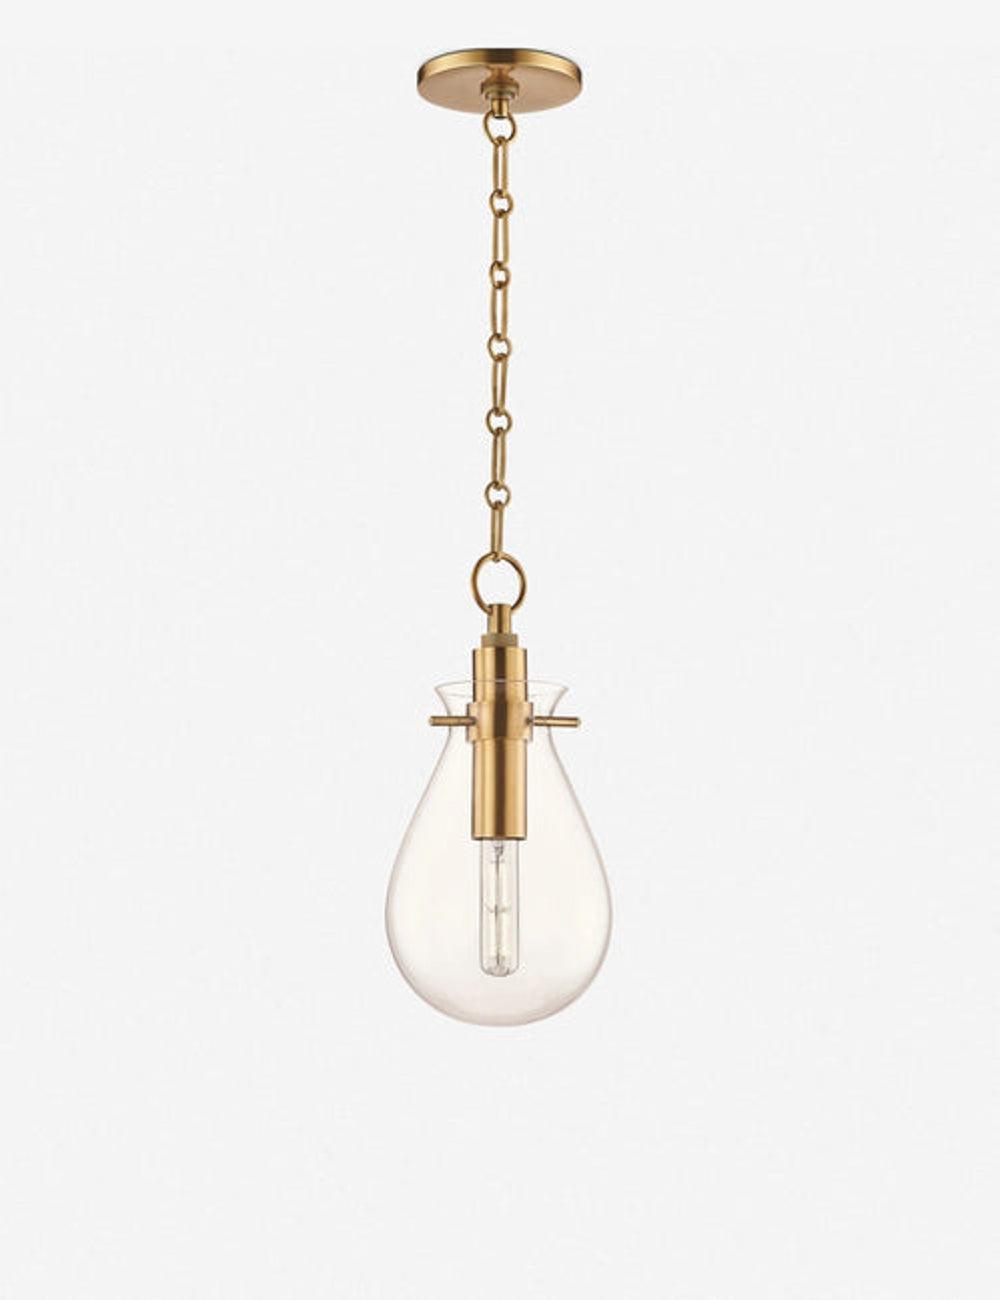 Elegant Aged Brass and Glass LED Pendant Light for Indoor/Outdoor